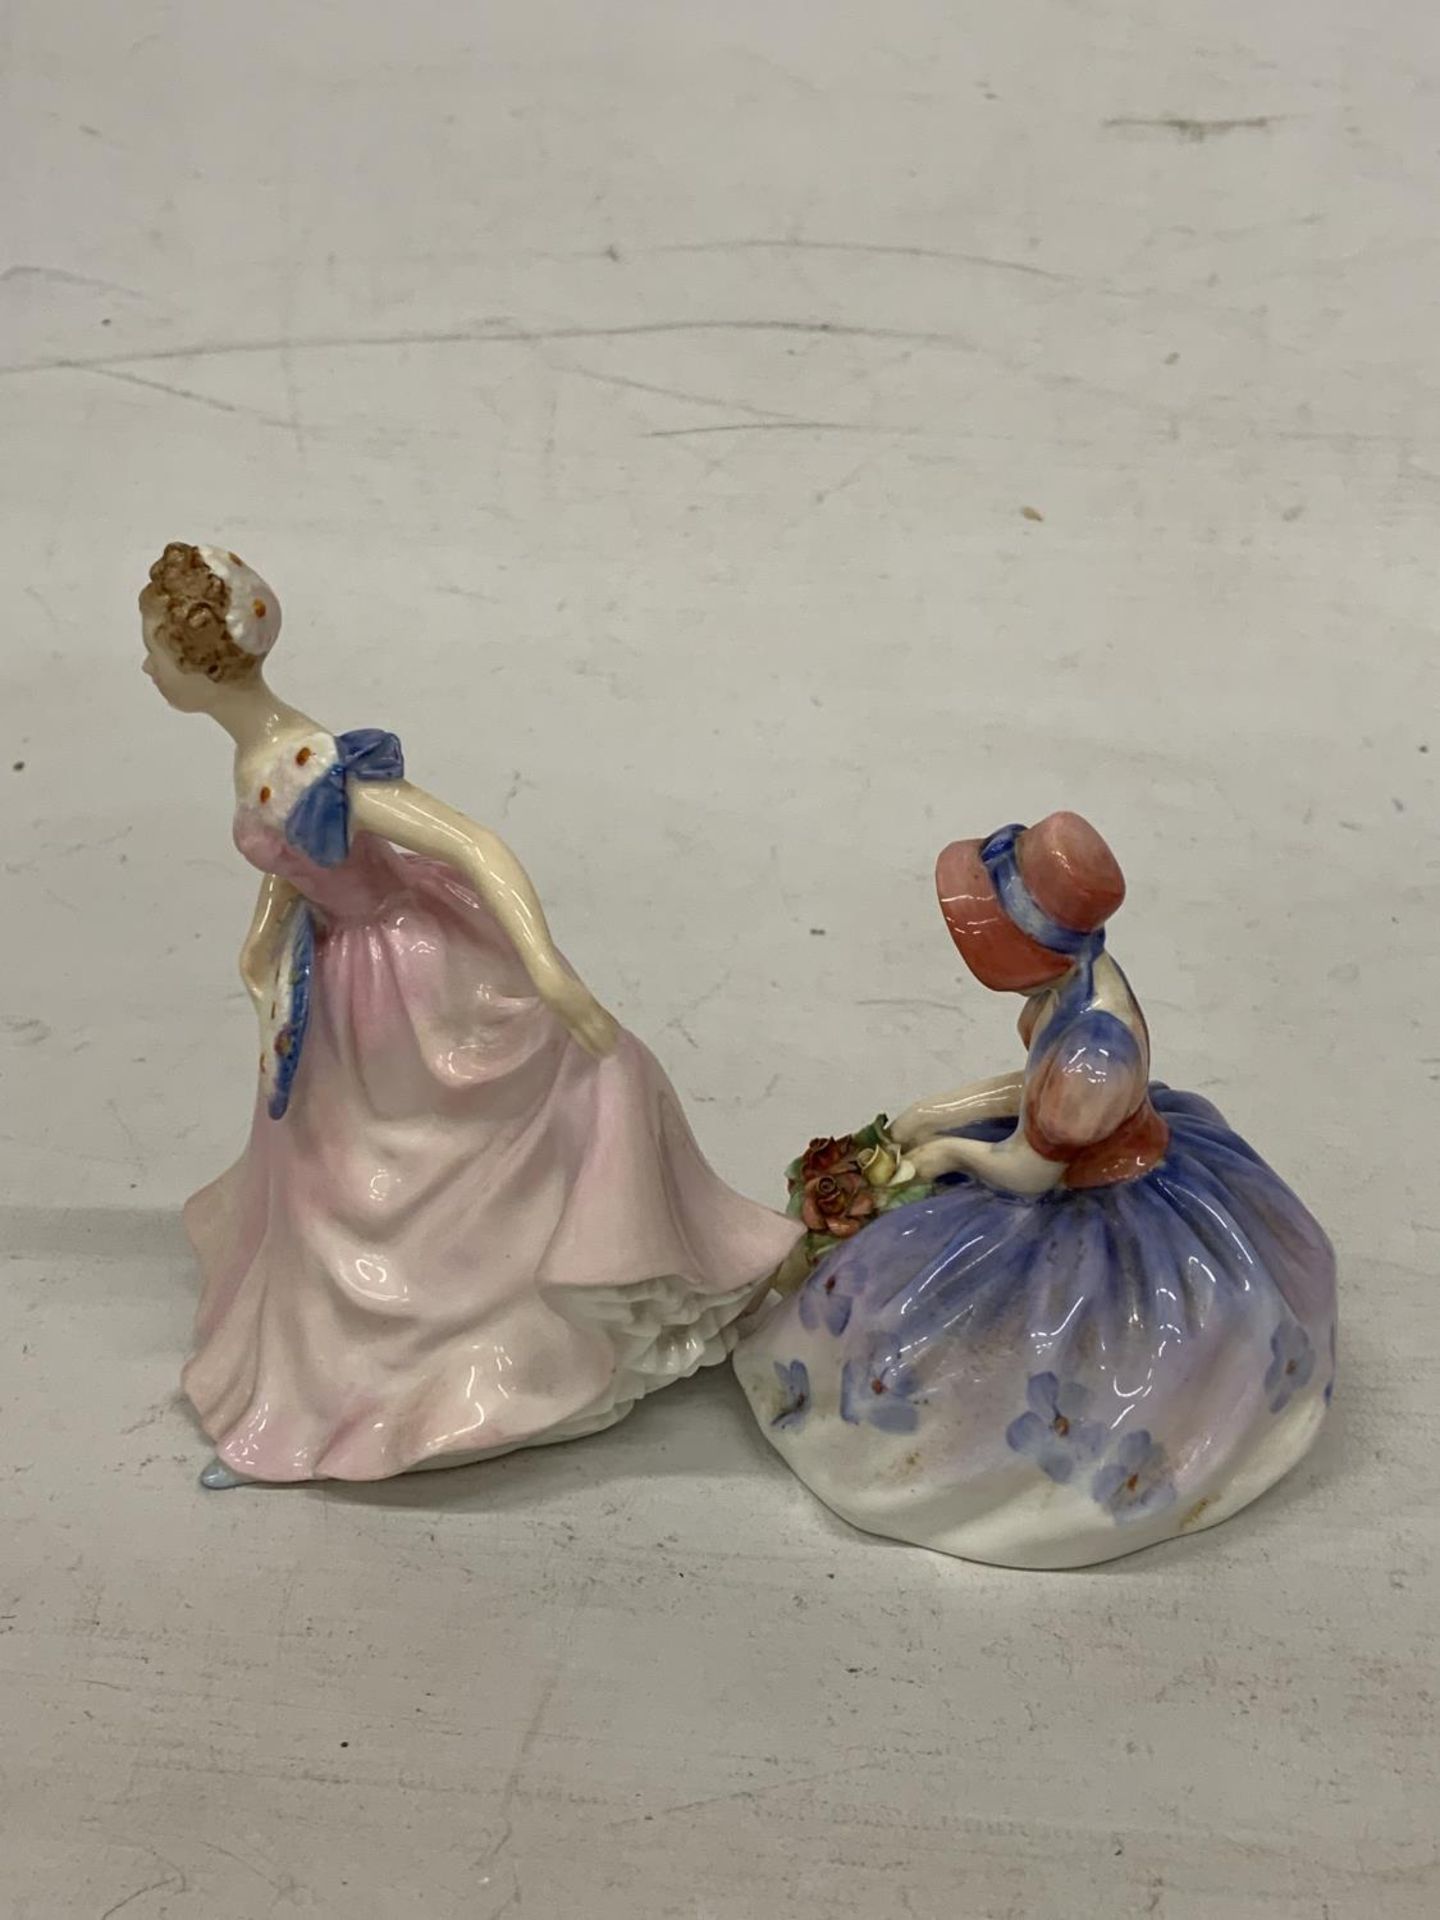 TWO ROYAL DOULTON FIGURINES "INVITATION" HN 2170 AND "MONICA" HN 1467 - Image 3 of 4